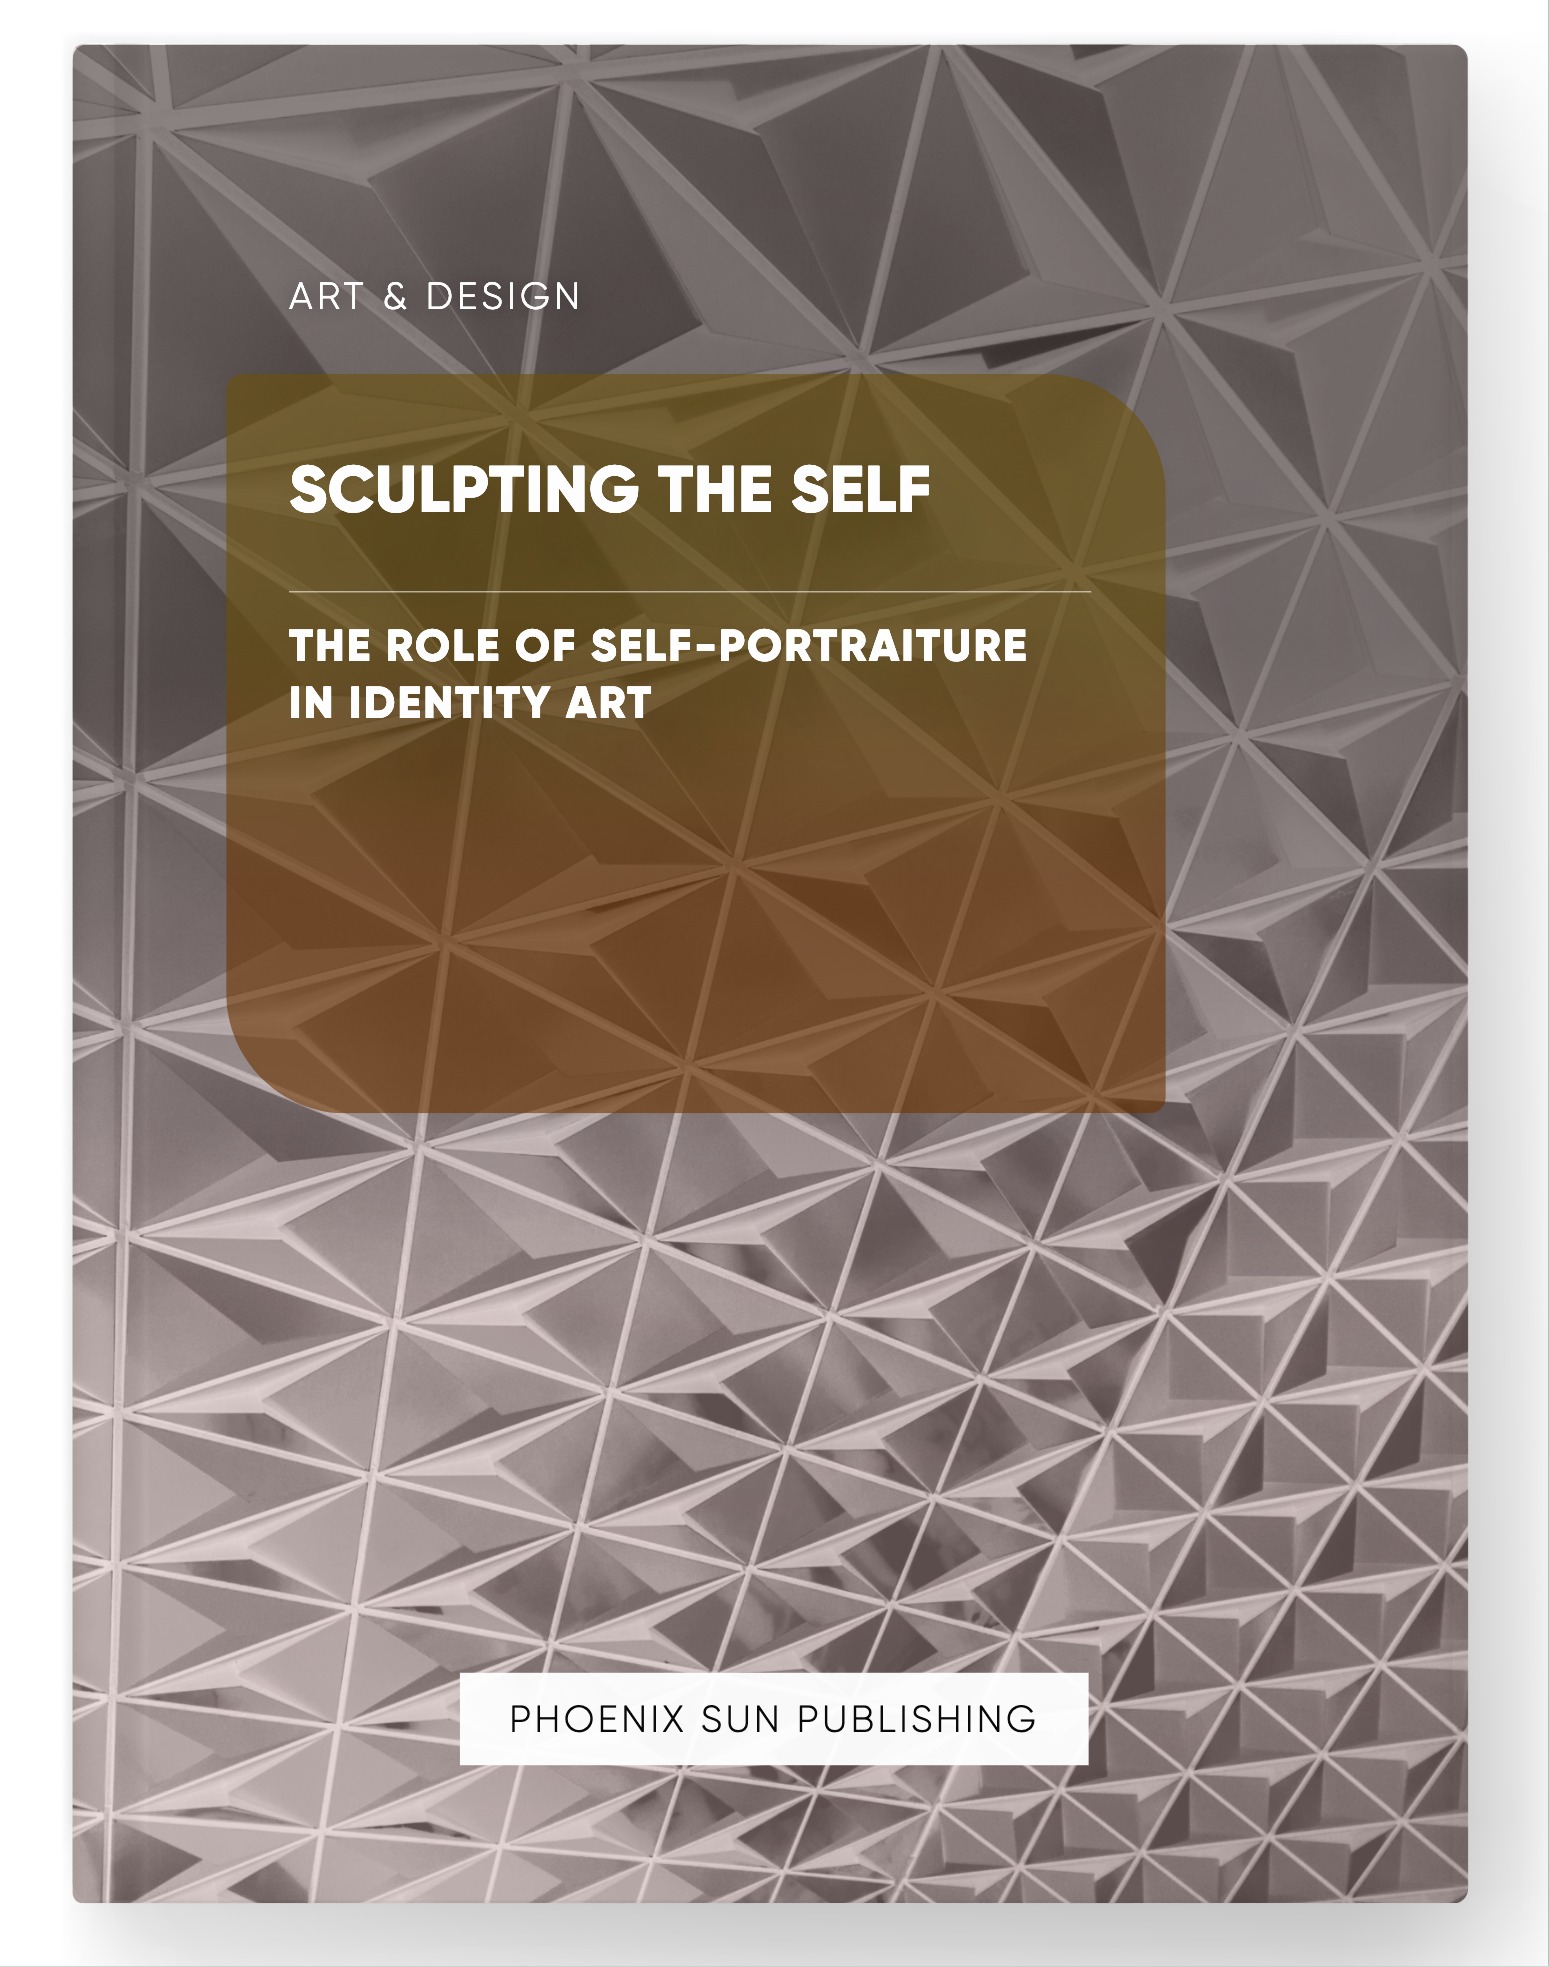 Sculpting the Self – The Role of Self-Portraiture in Identity Art